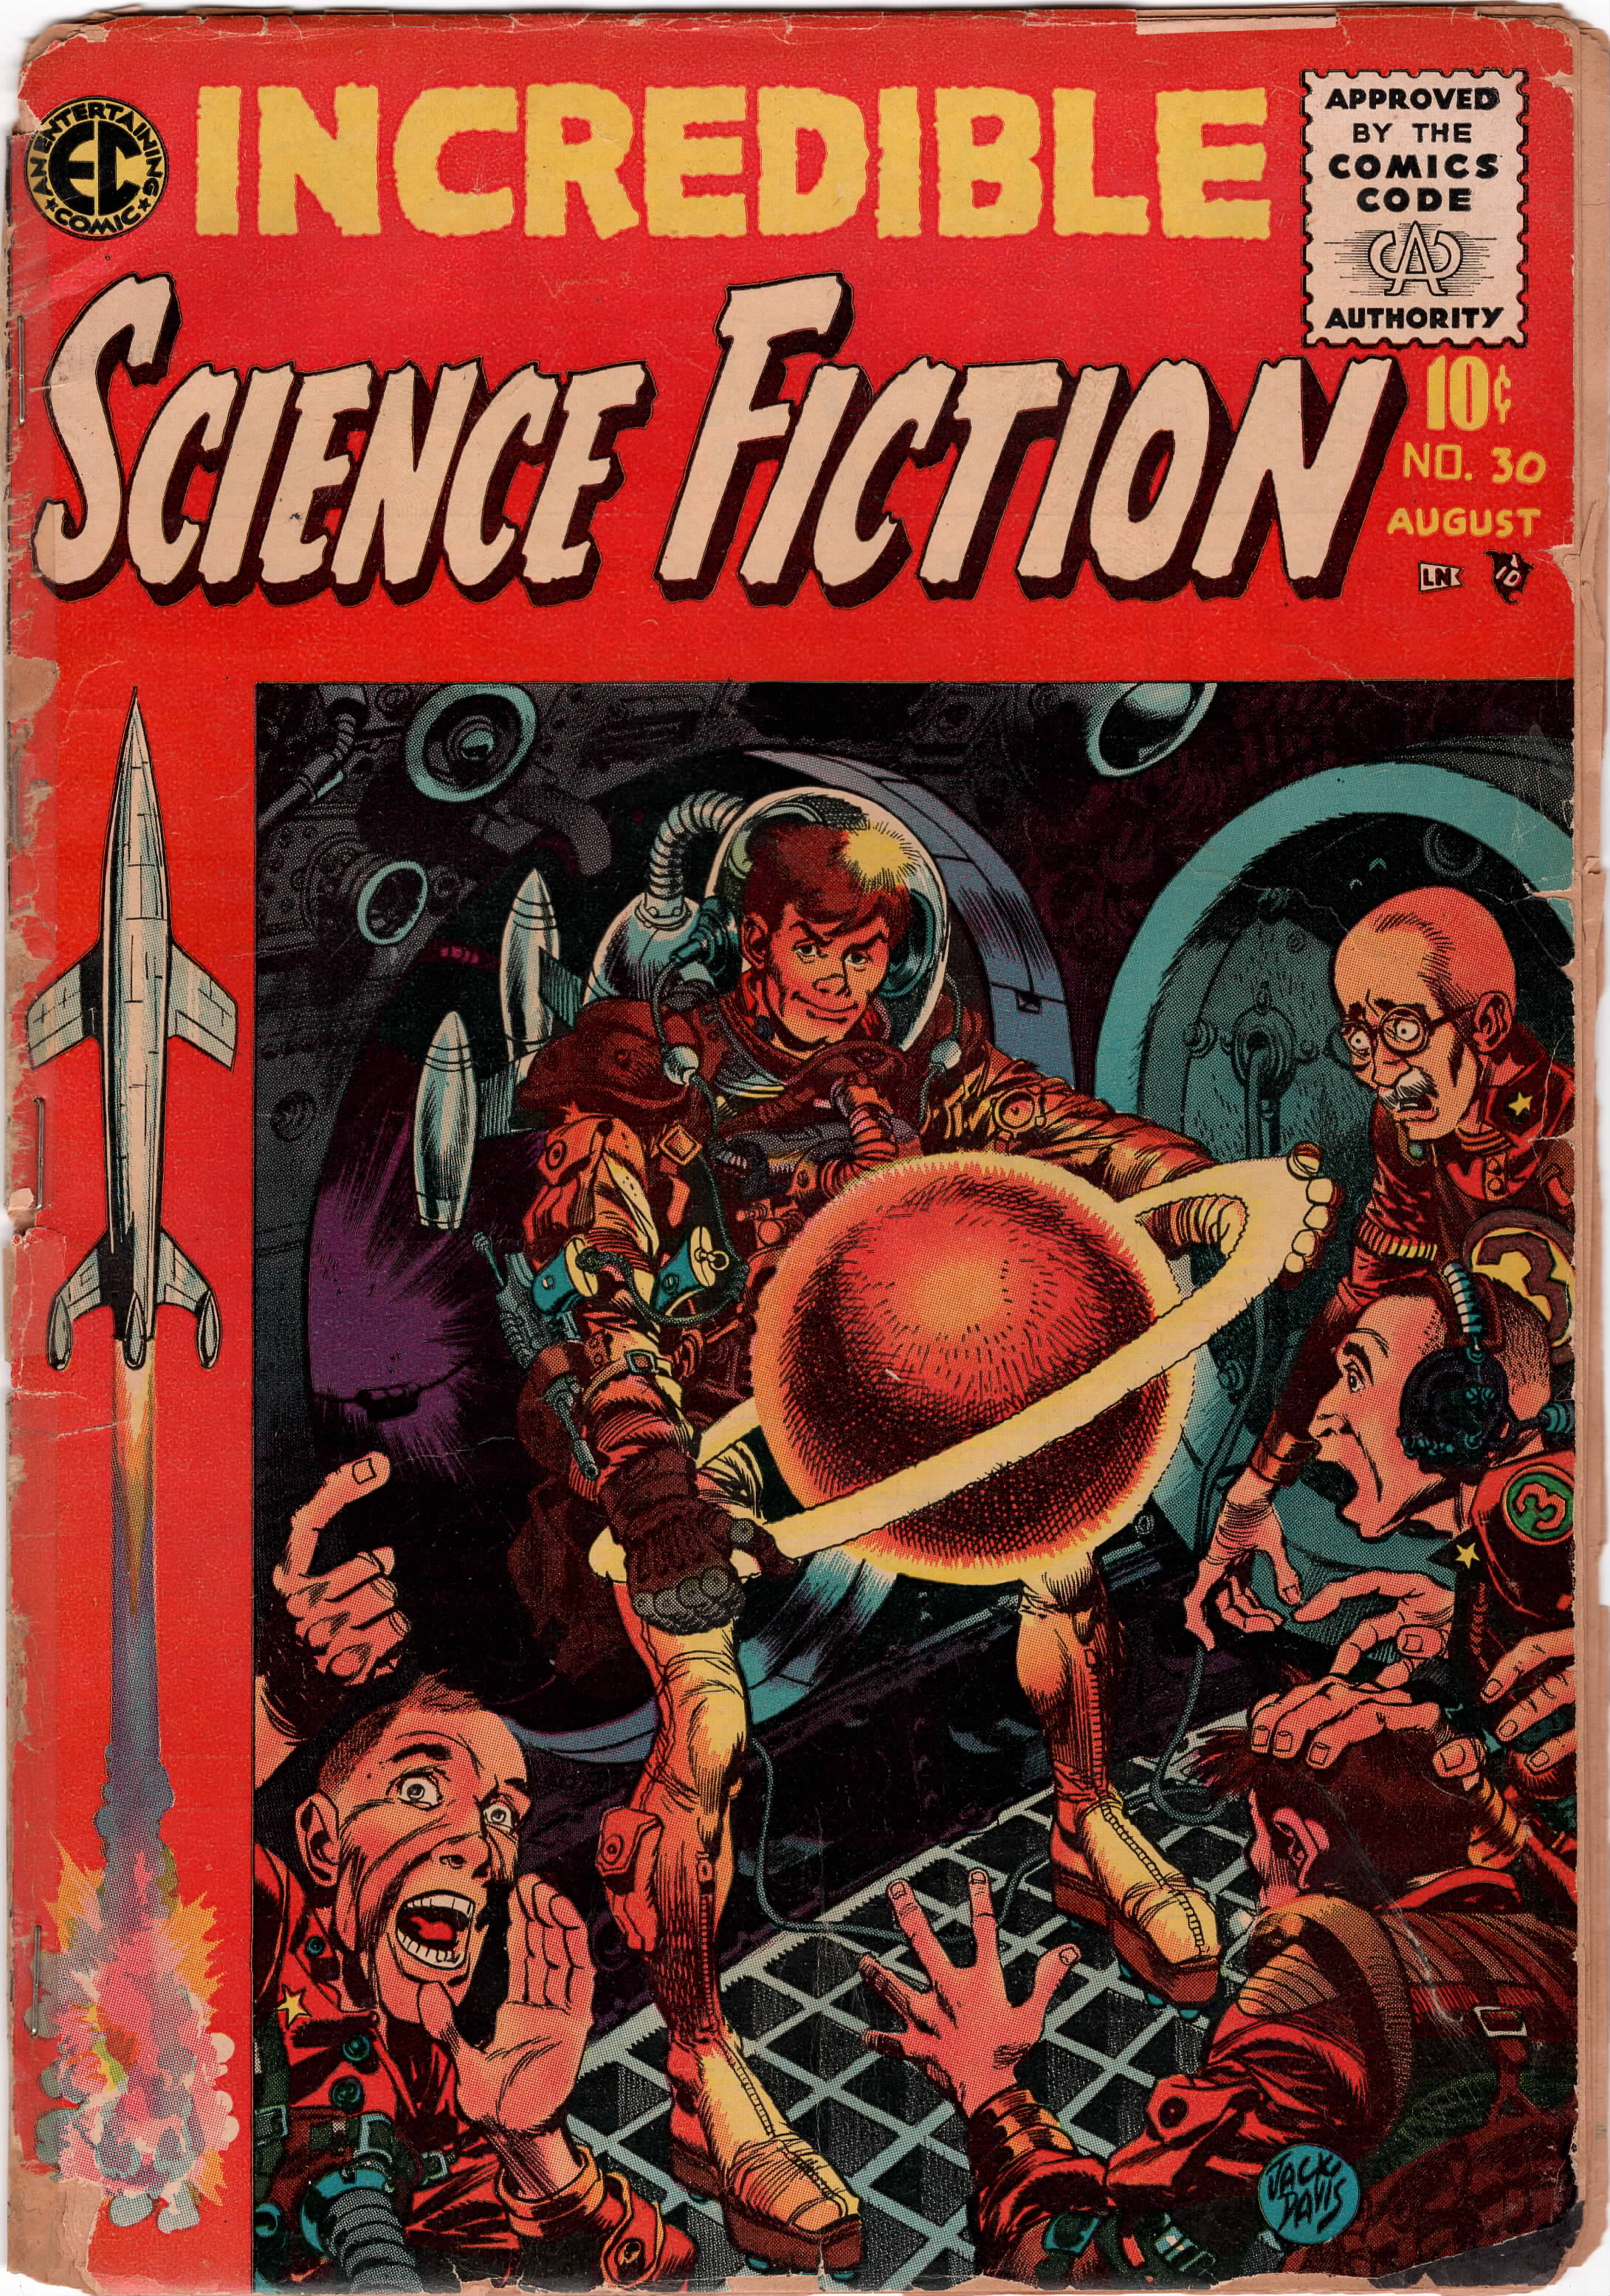 Incredible Science Fiction #30